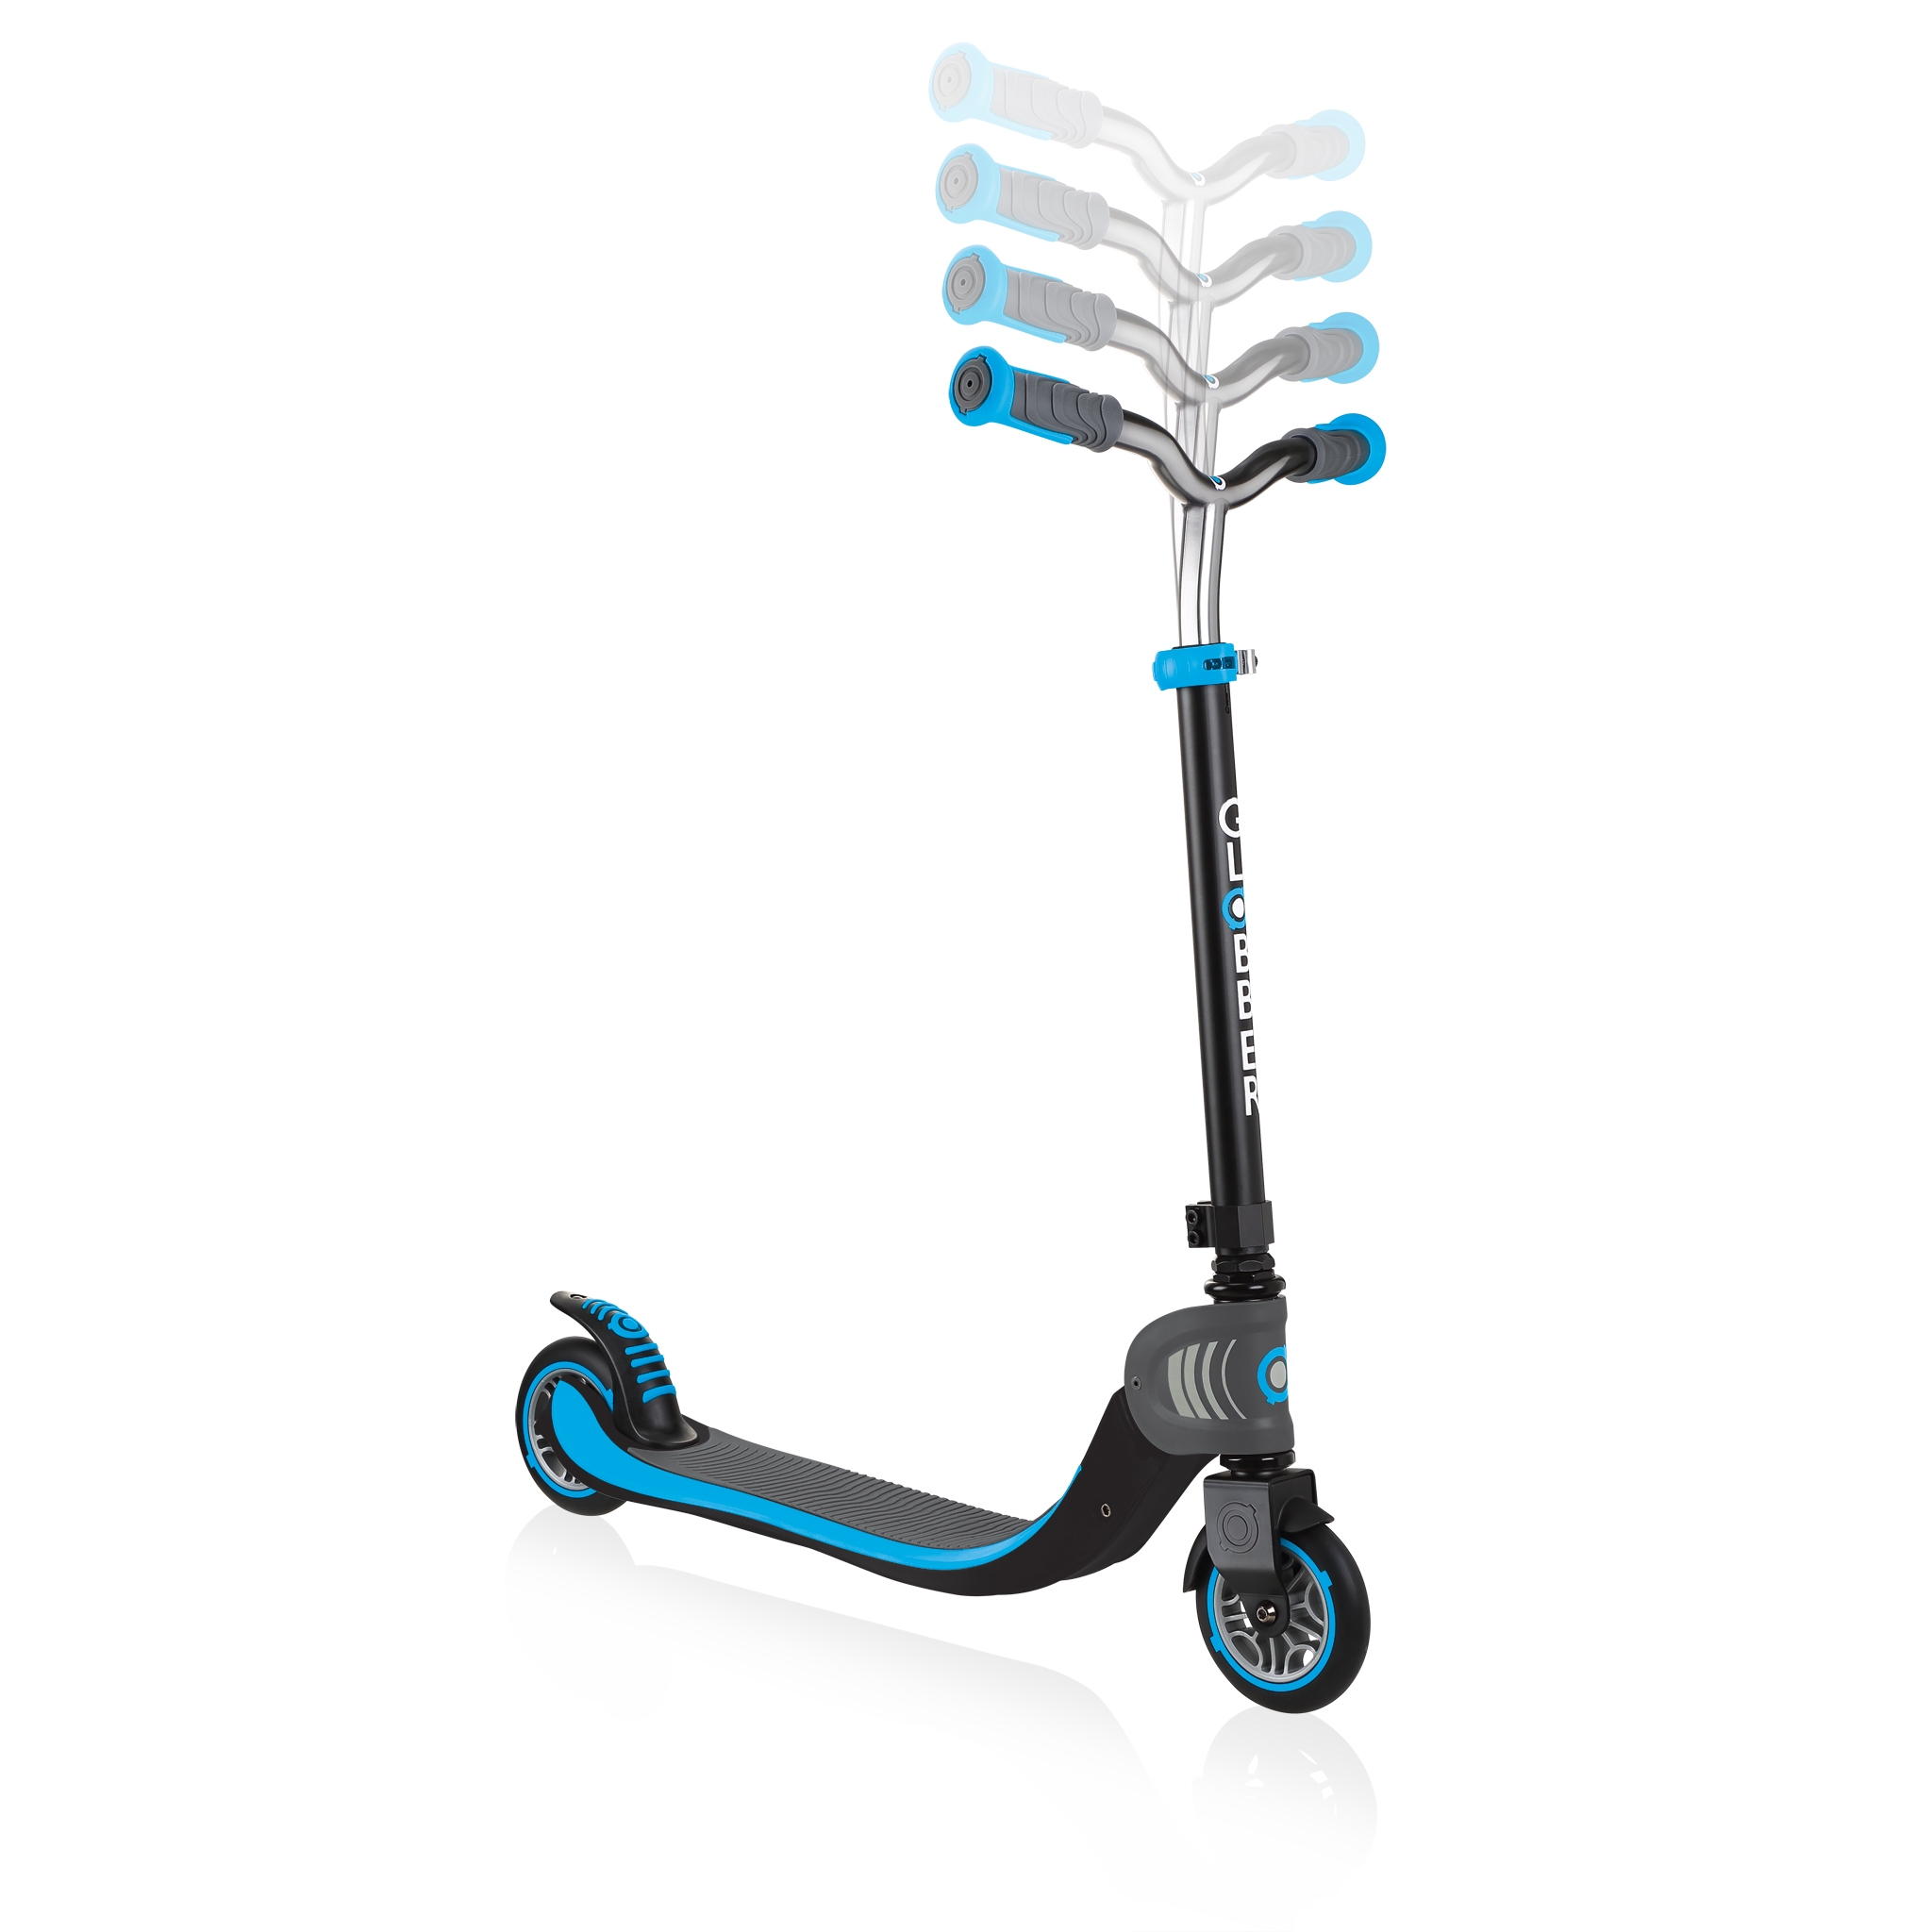 FLOW-FOLDABLE-125-2-wheel-scooter-for-kids-with-adjustable-t-bar-sky-blue 2